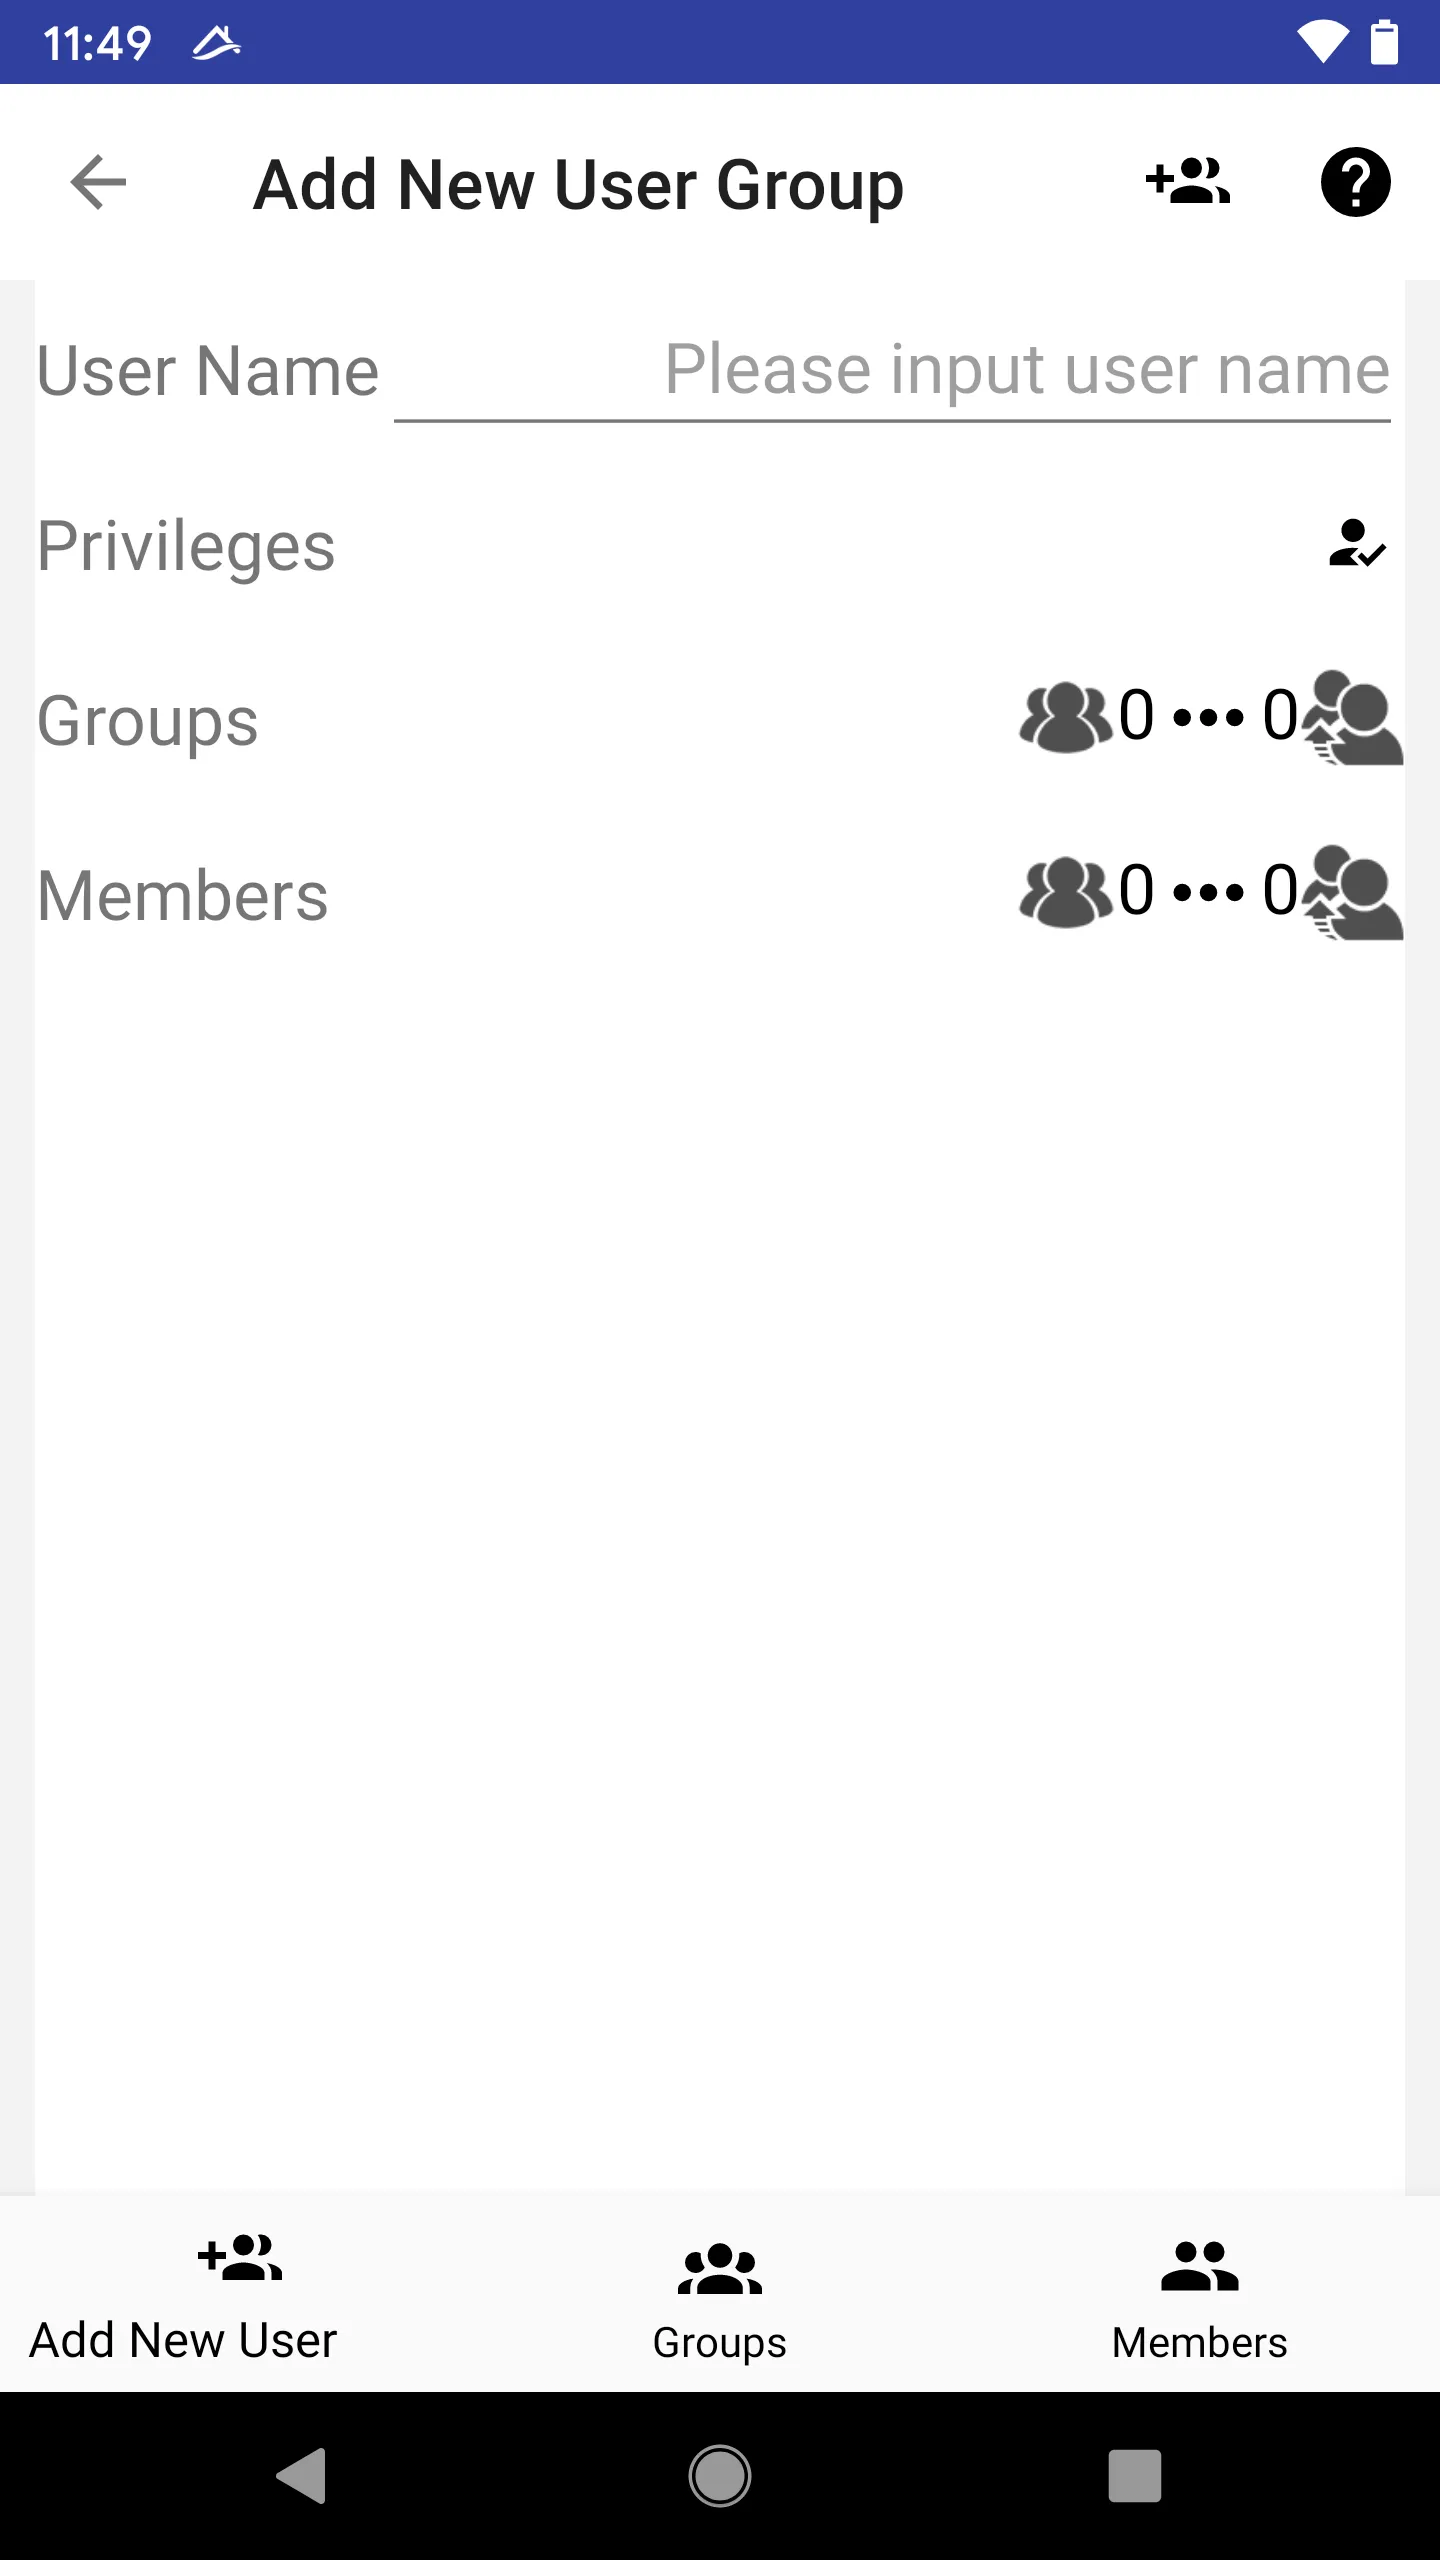 New Group